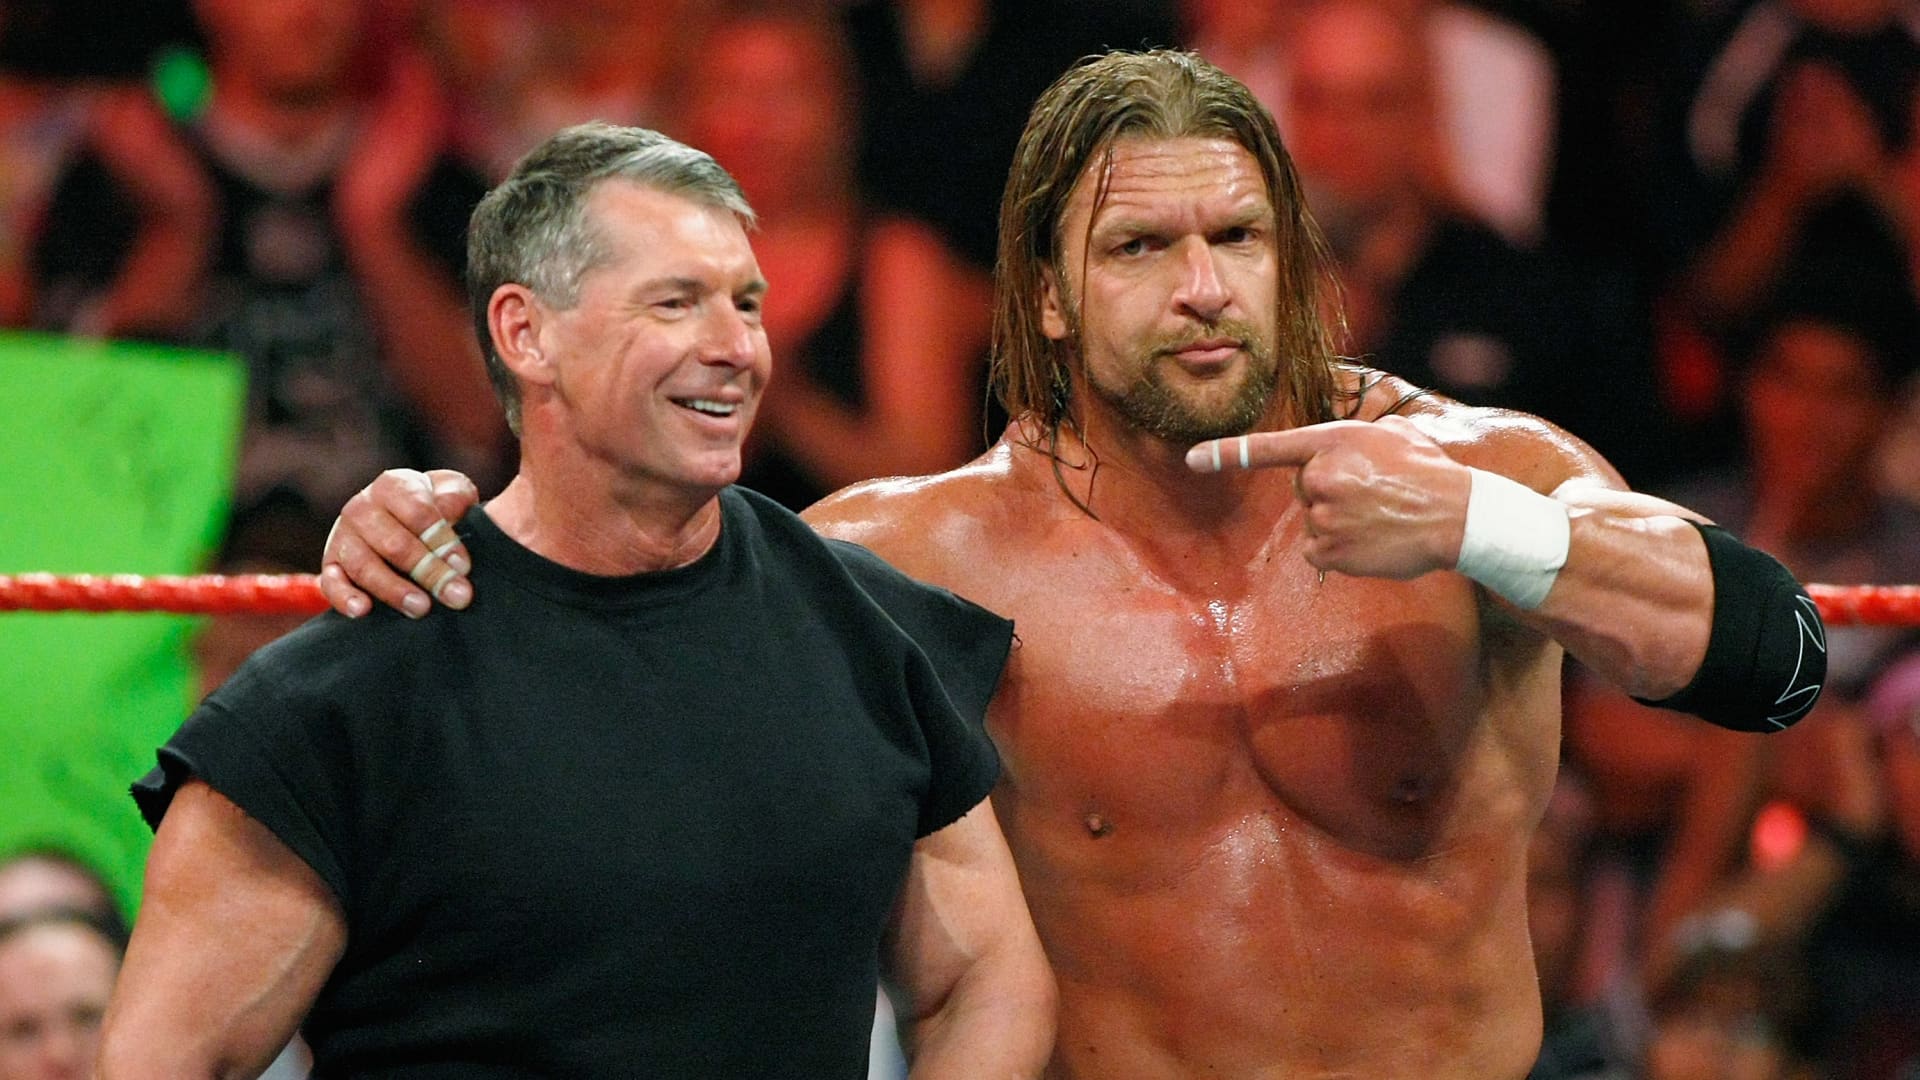 World Wrestling Entertainment Inc. Chairman Vince McMahon (L) and wrestler Triple H appear in the ring during the WWE Monday Night Raw show at the Thomas & Mack Center August 24, 2009